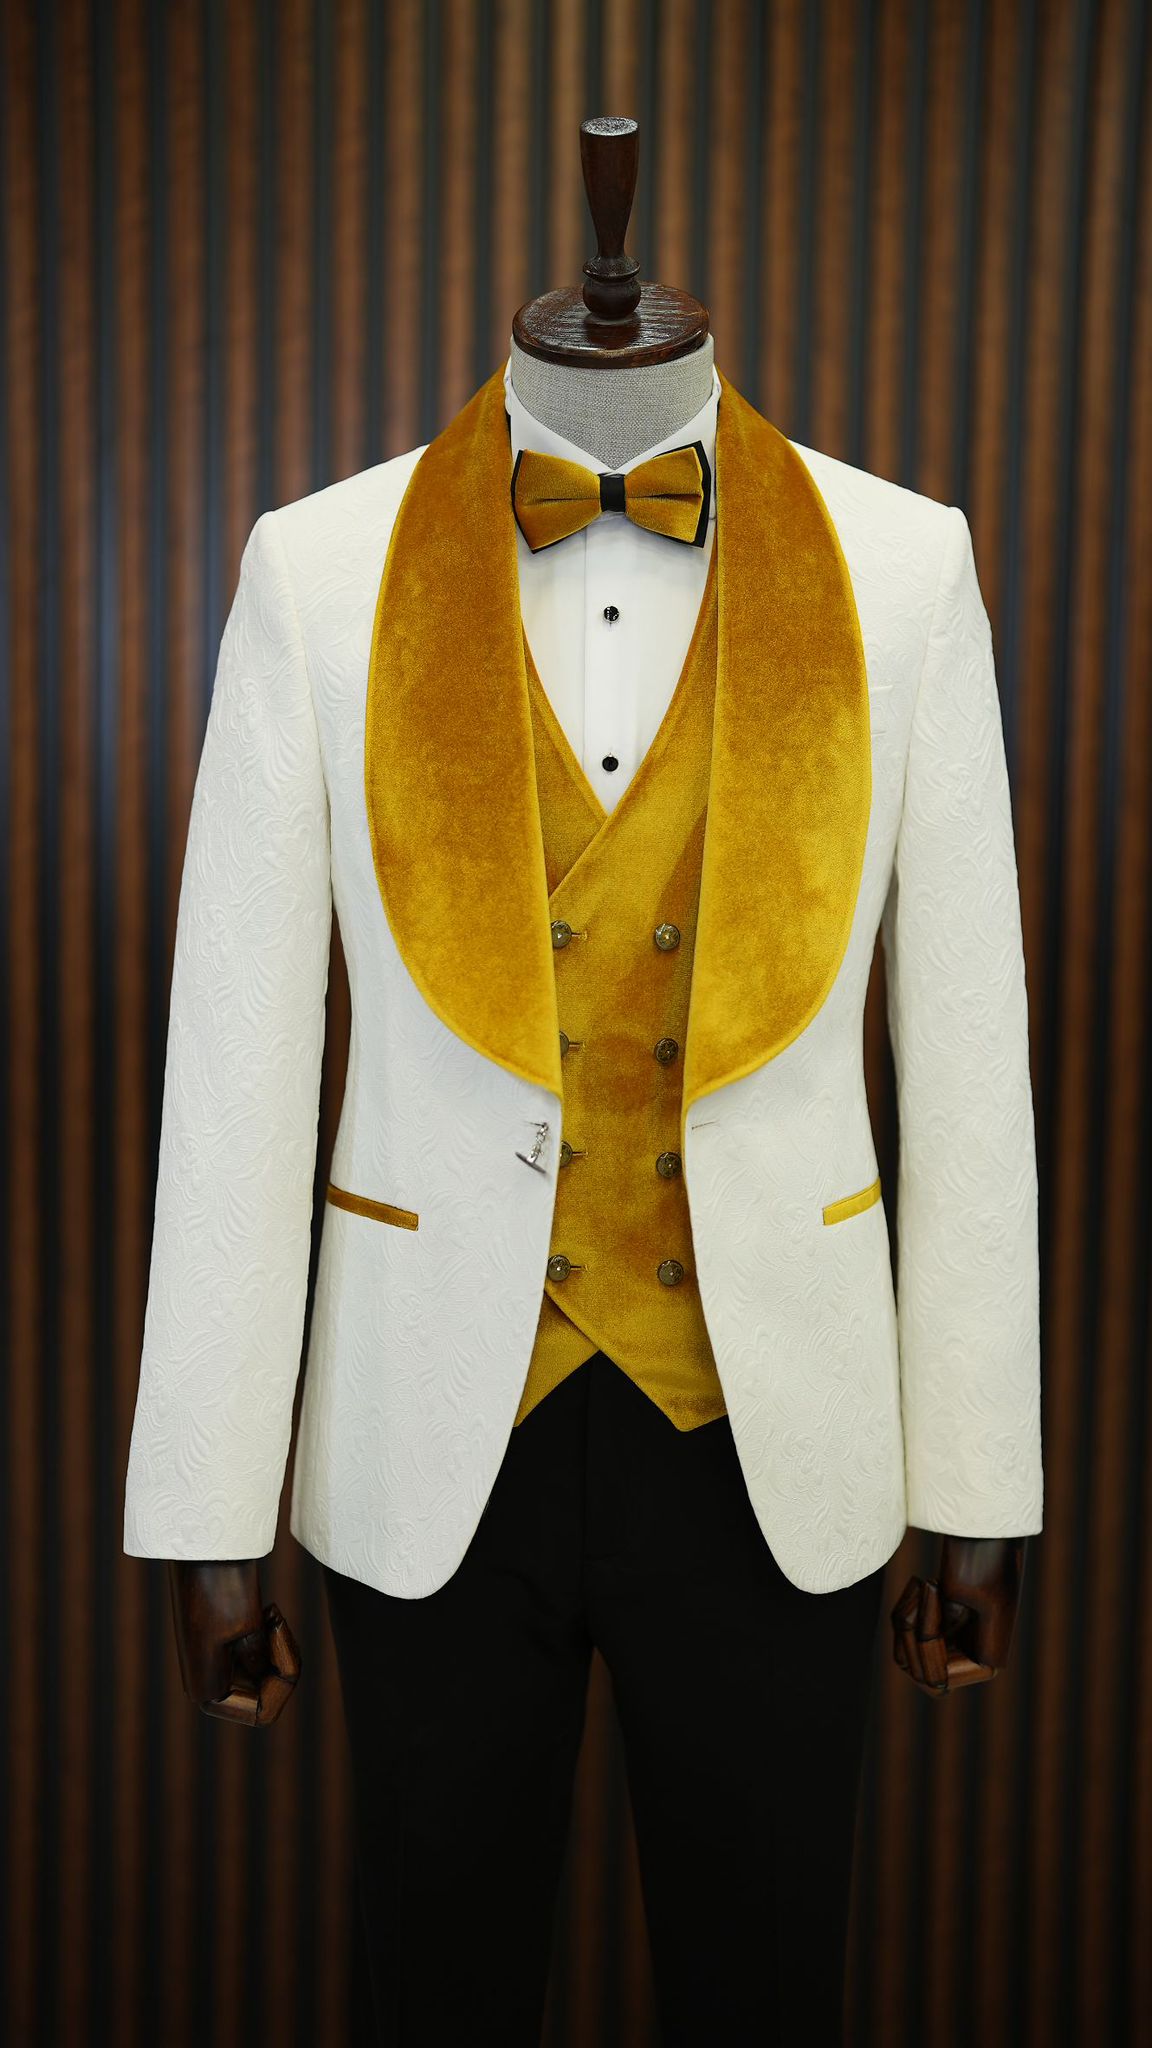 A Yellow and White Tuxedo Suit on display.